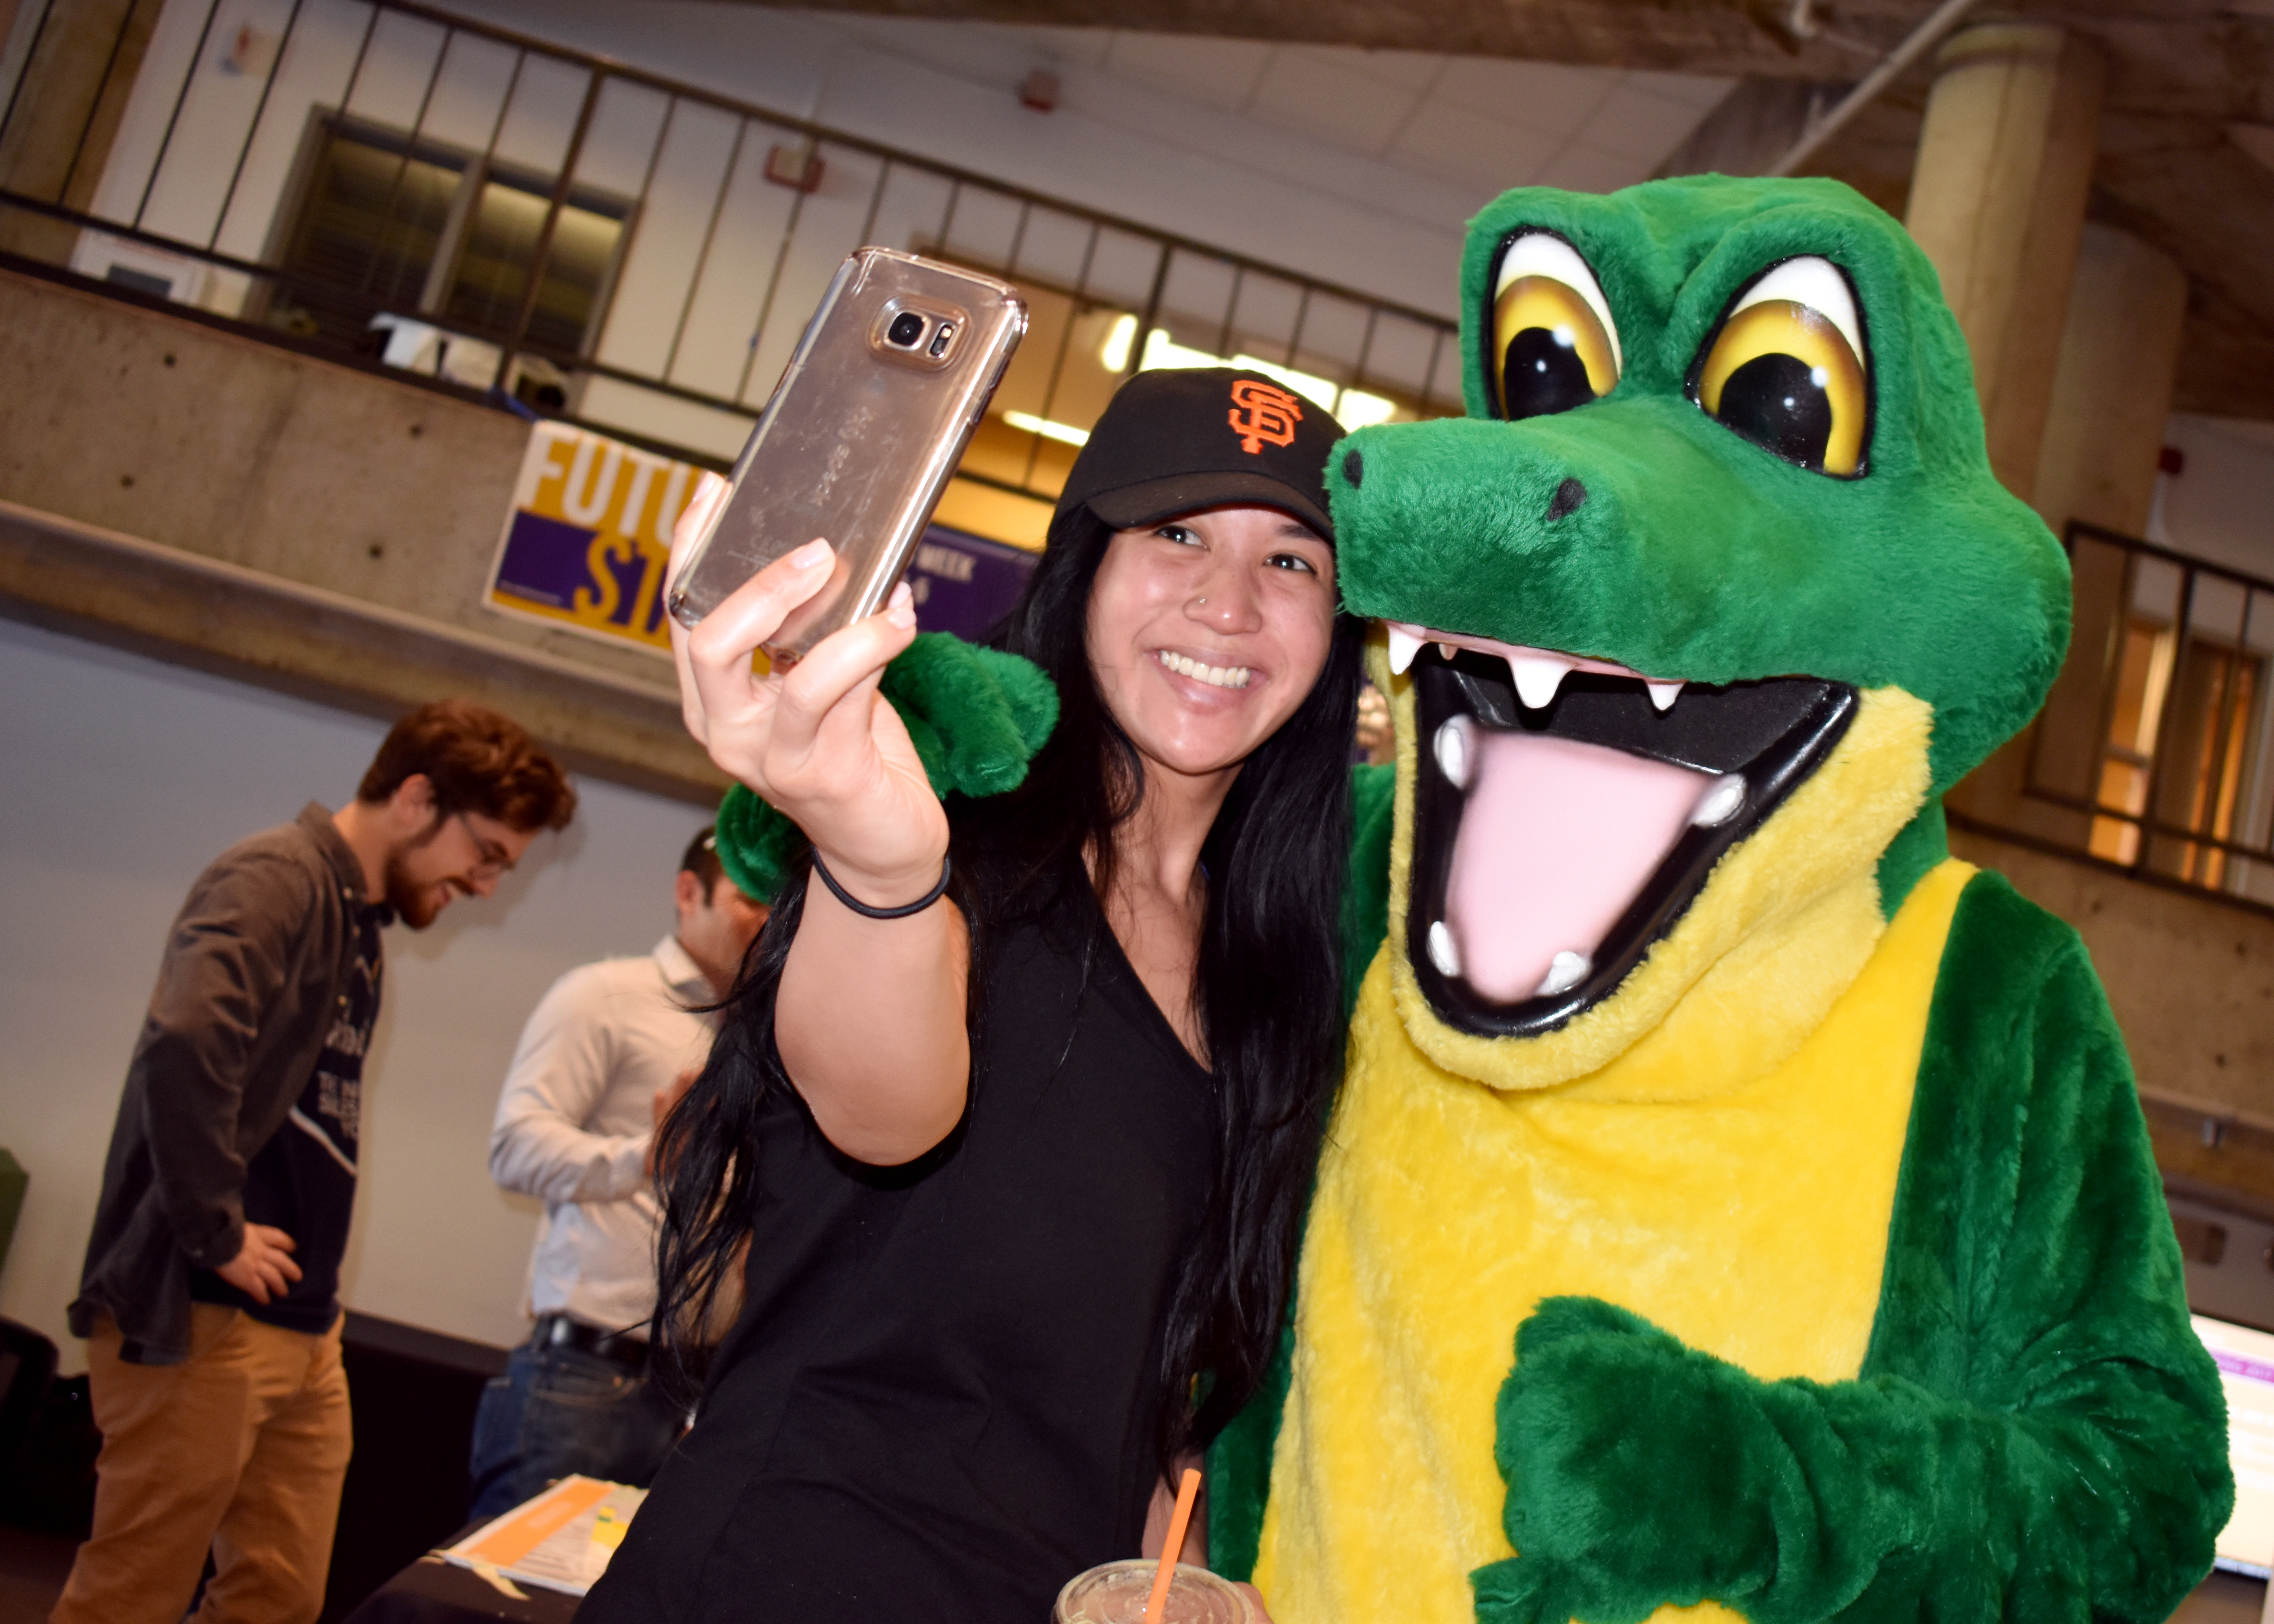 girl taking a selfie with the gator mascot